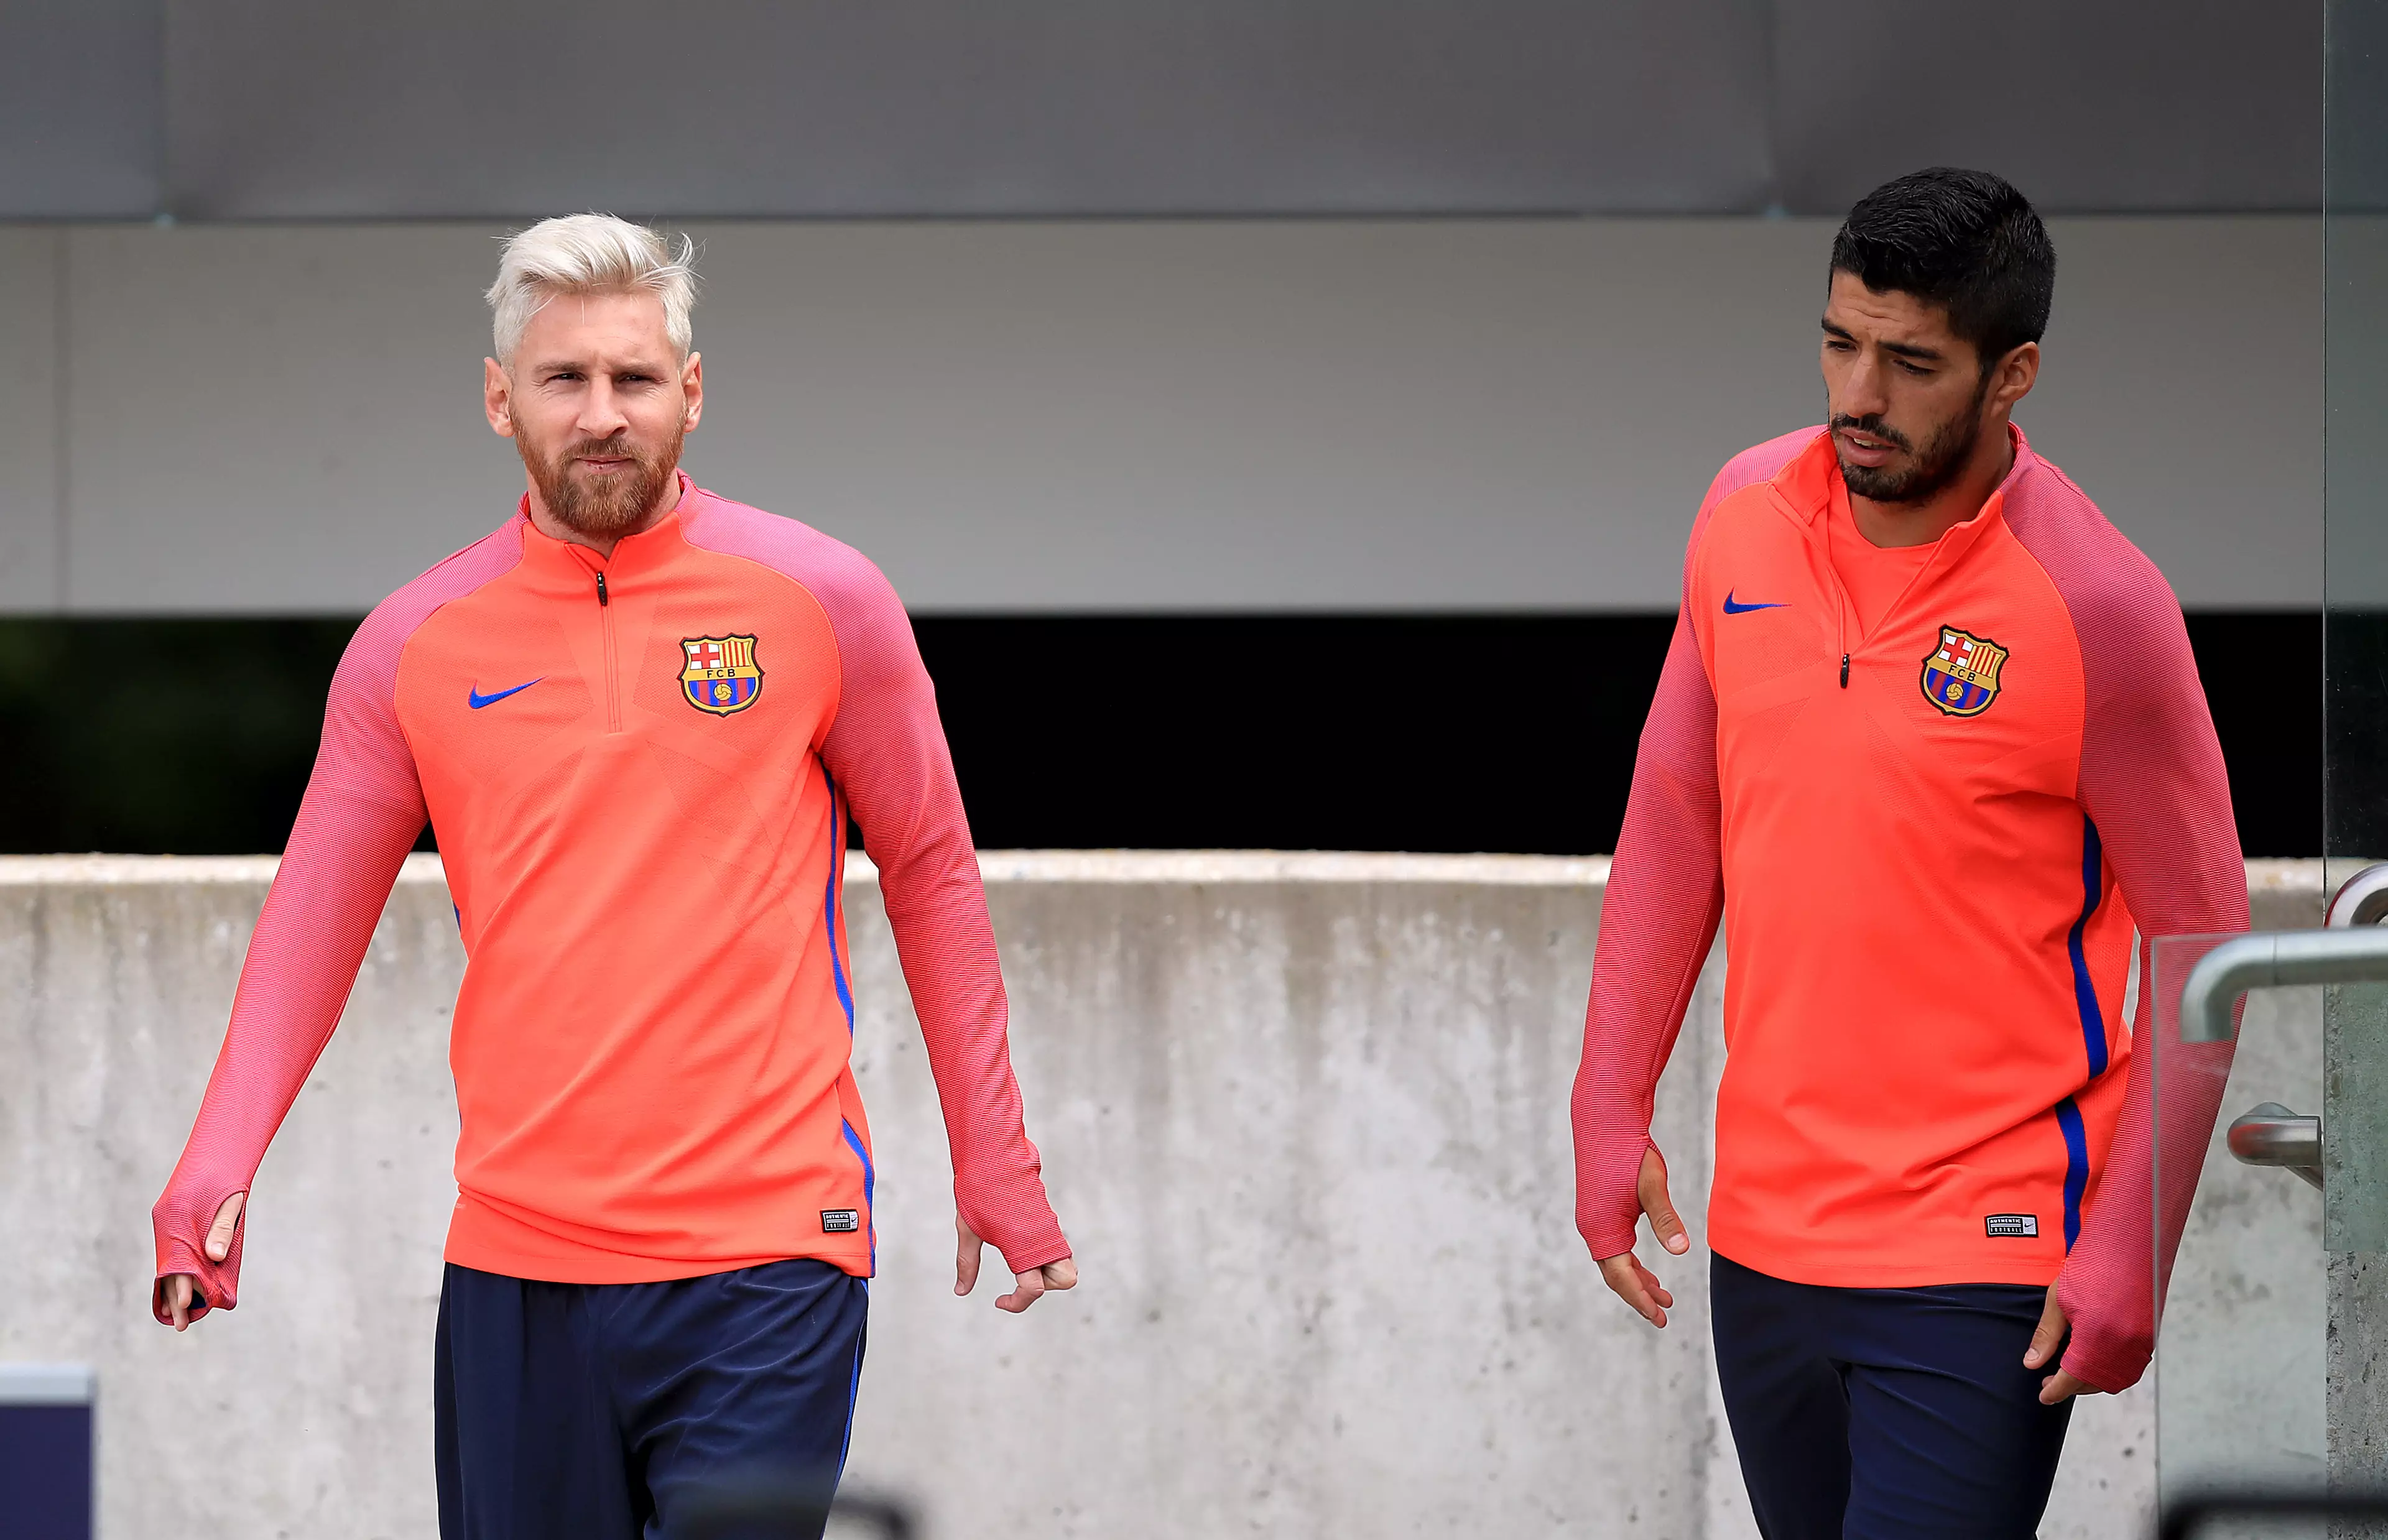 Barcelona Fans React Angrily Following UEFA's Messi And Suarez Best Player Award Snub